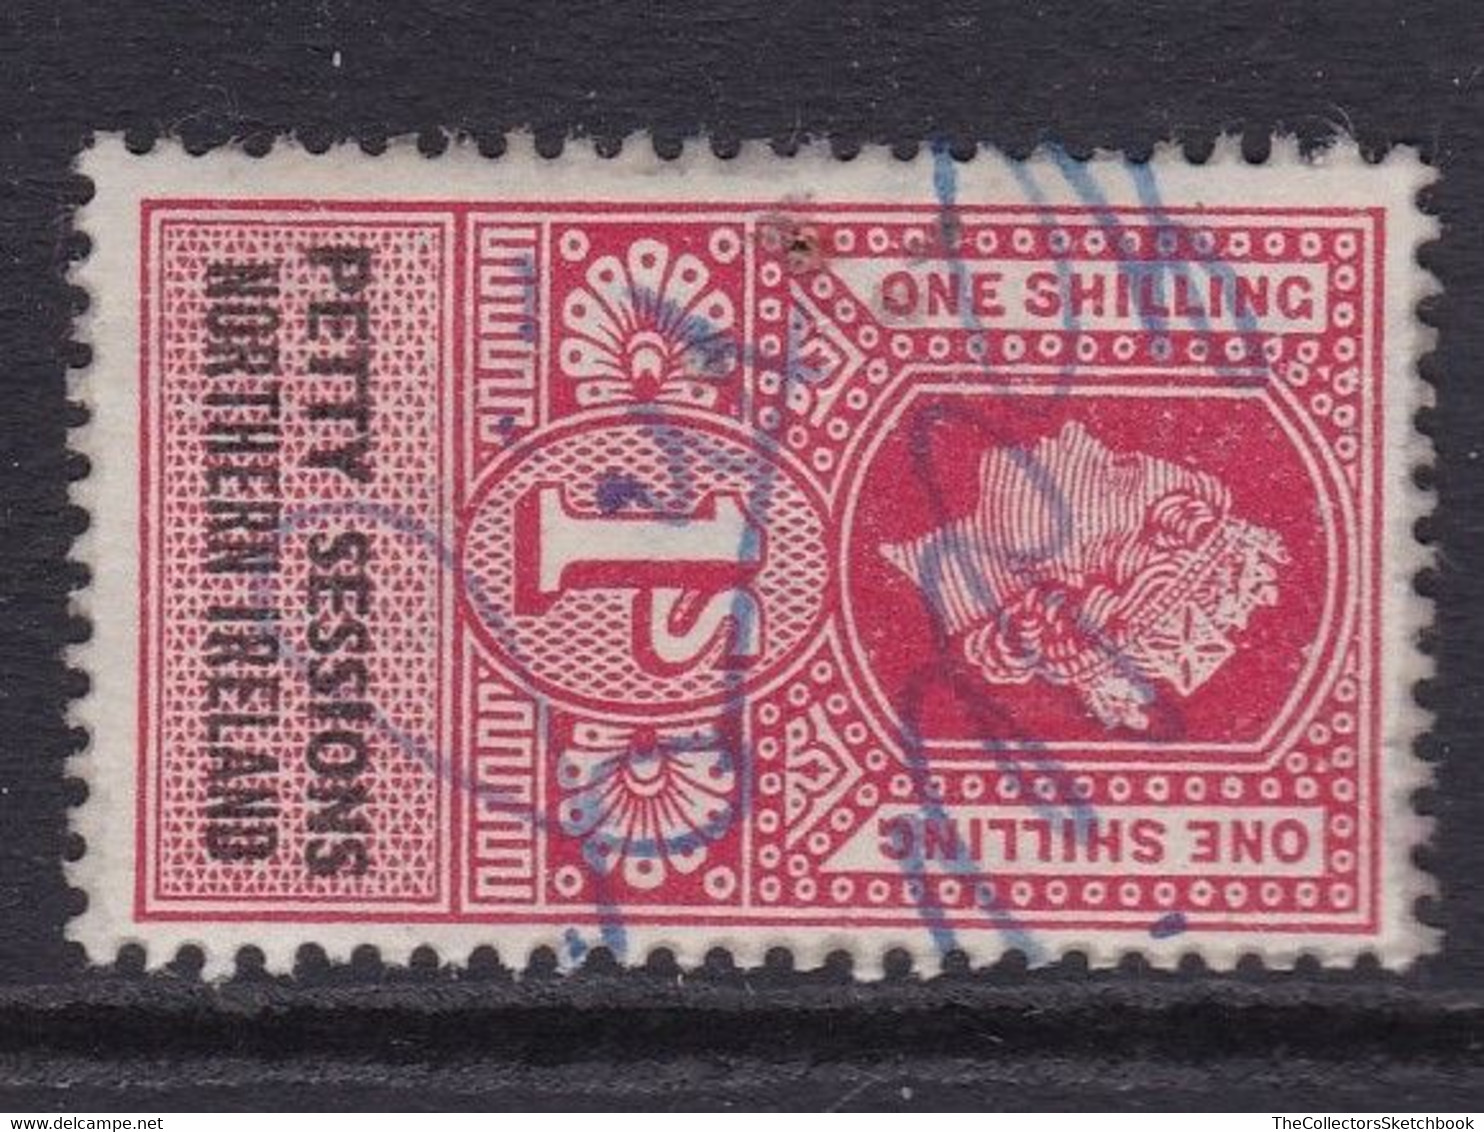 GB Fiscal/ Revenue Stamp.  Northern Ireland Petty Sessions 1/- Scarlet & Black Barefoot 11 GU - Revenue Stamps